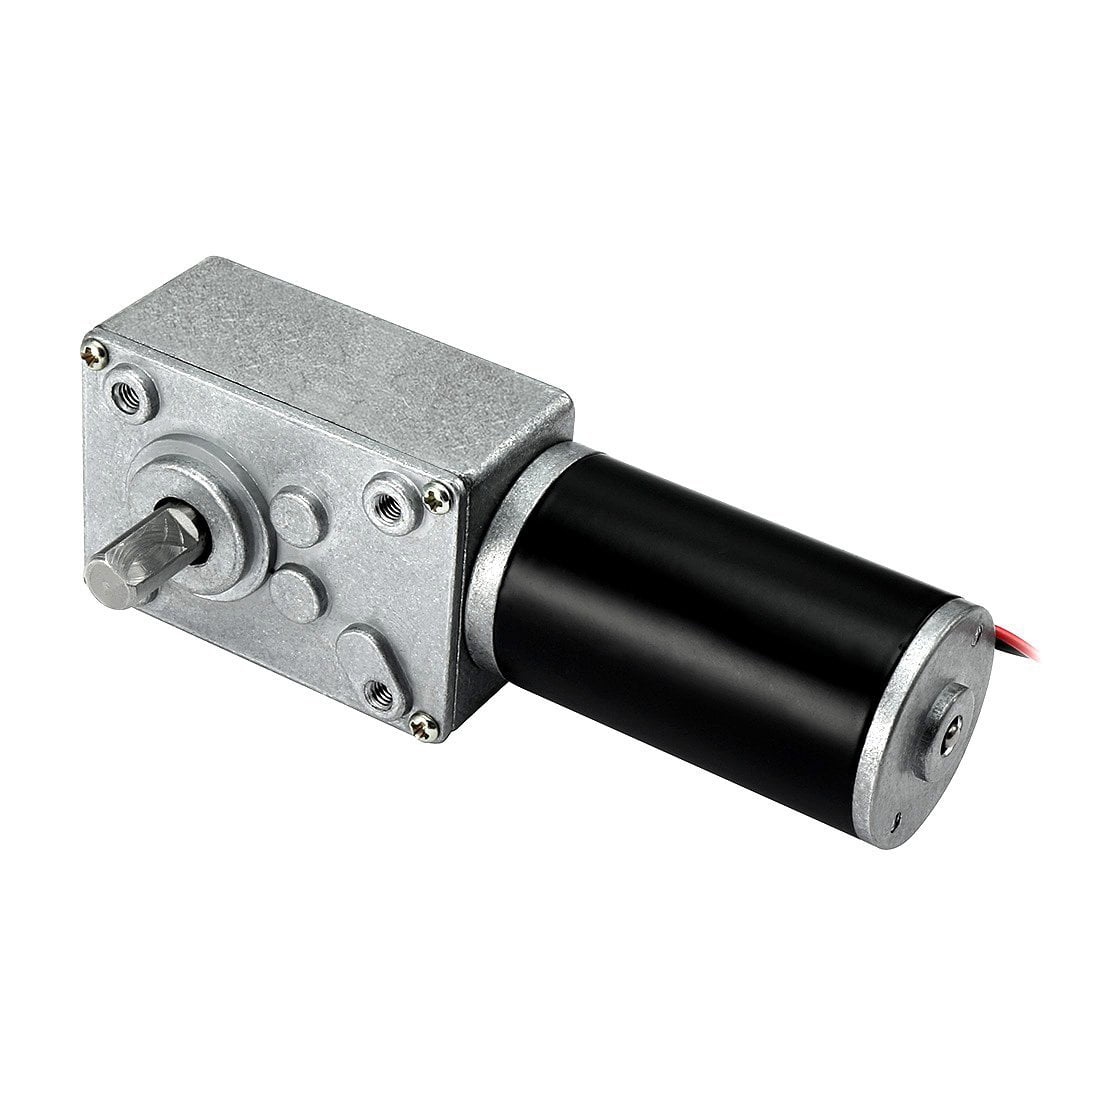 12V DC 60RPM Powerful High Torque Gear Box Motor Electric Micro Speed Reduction 